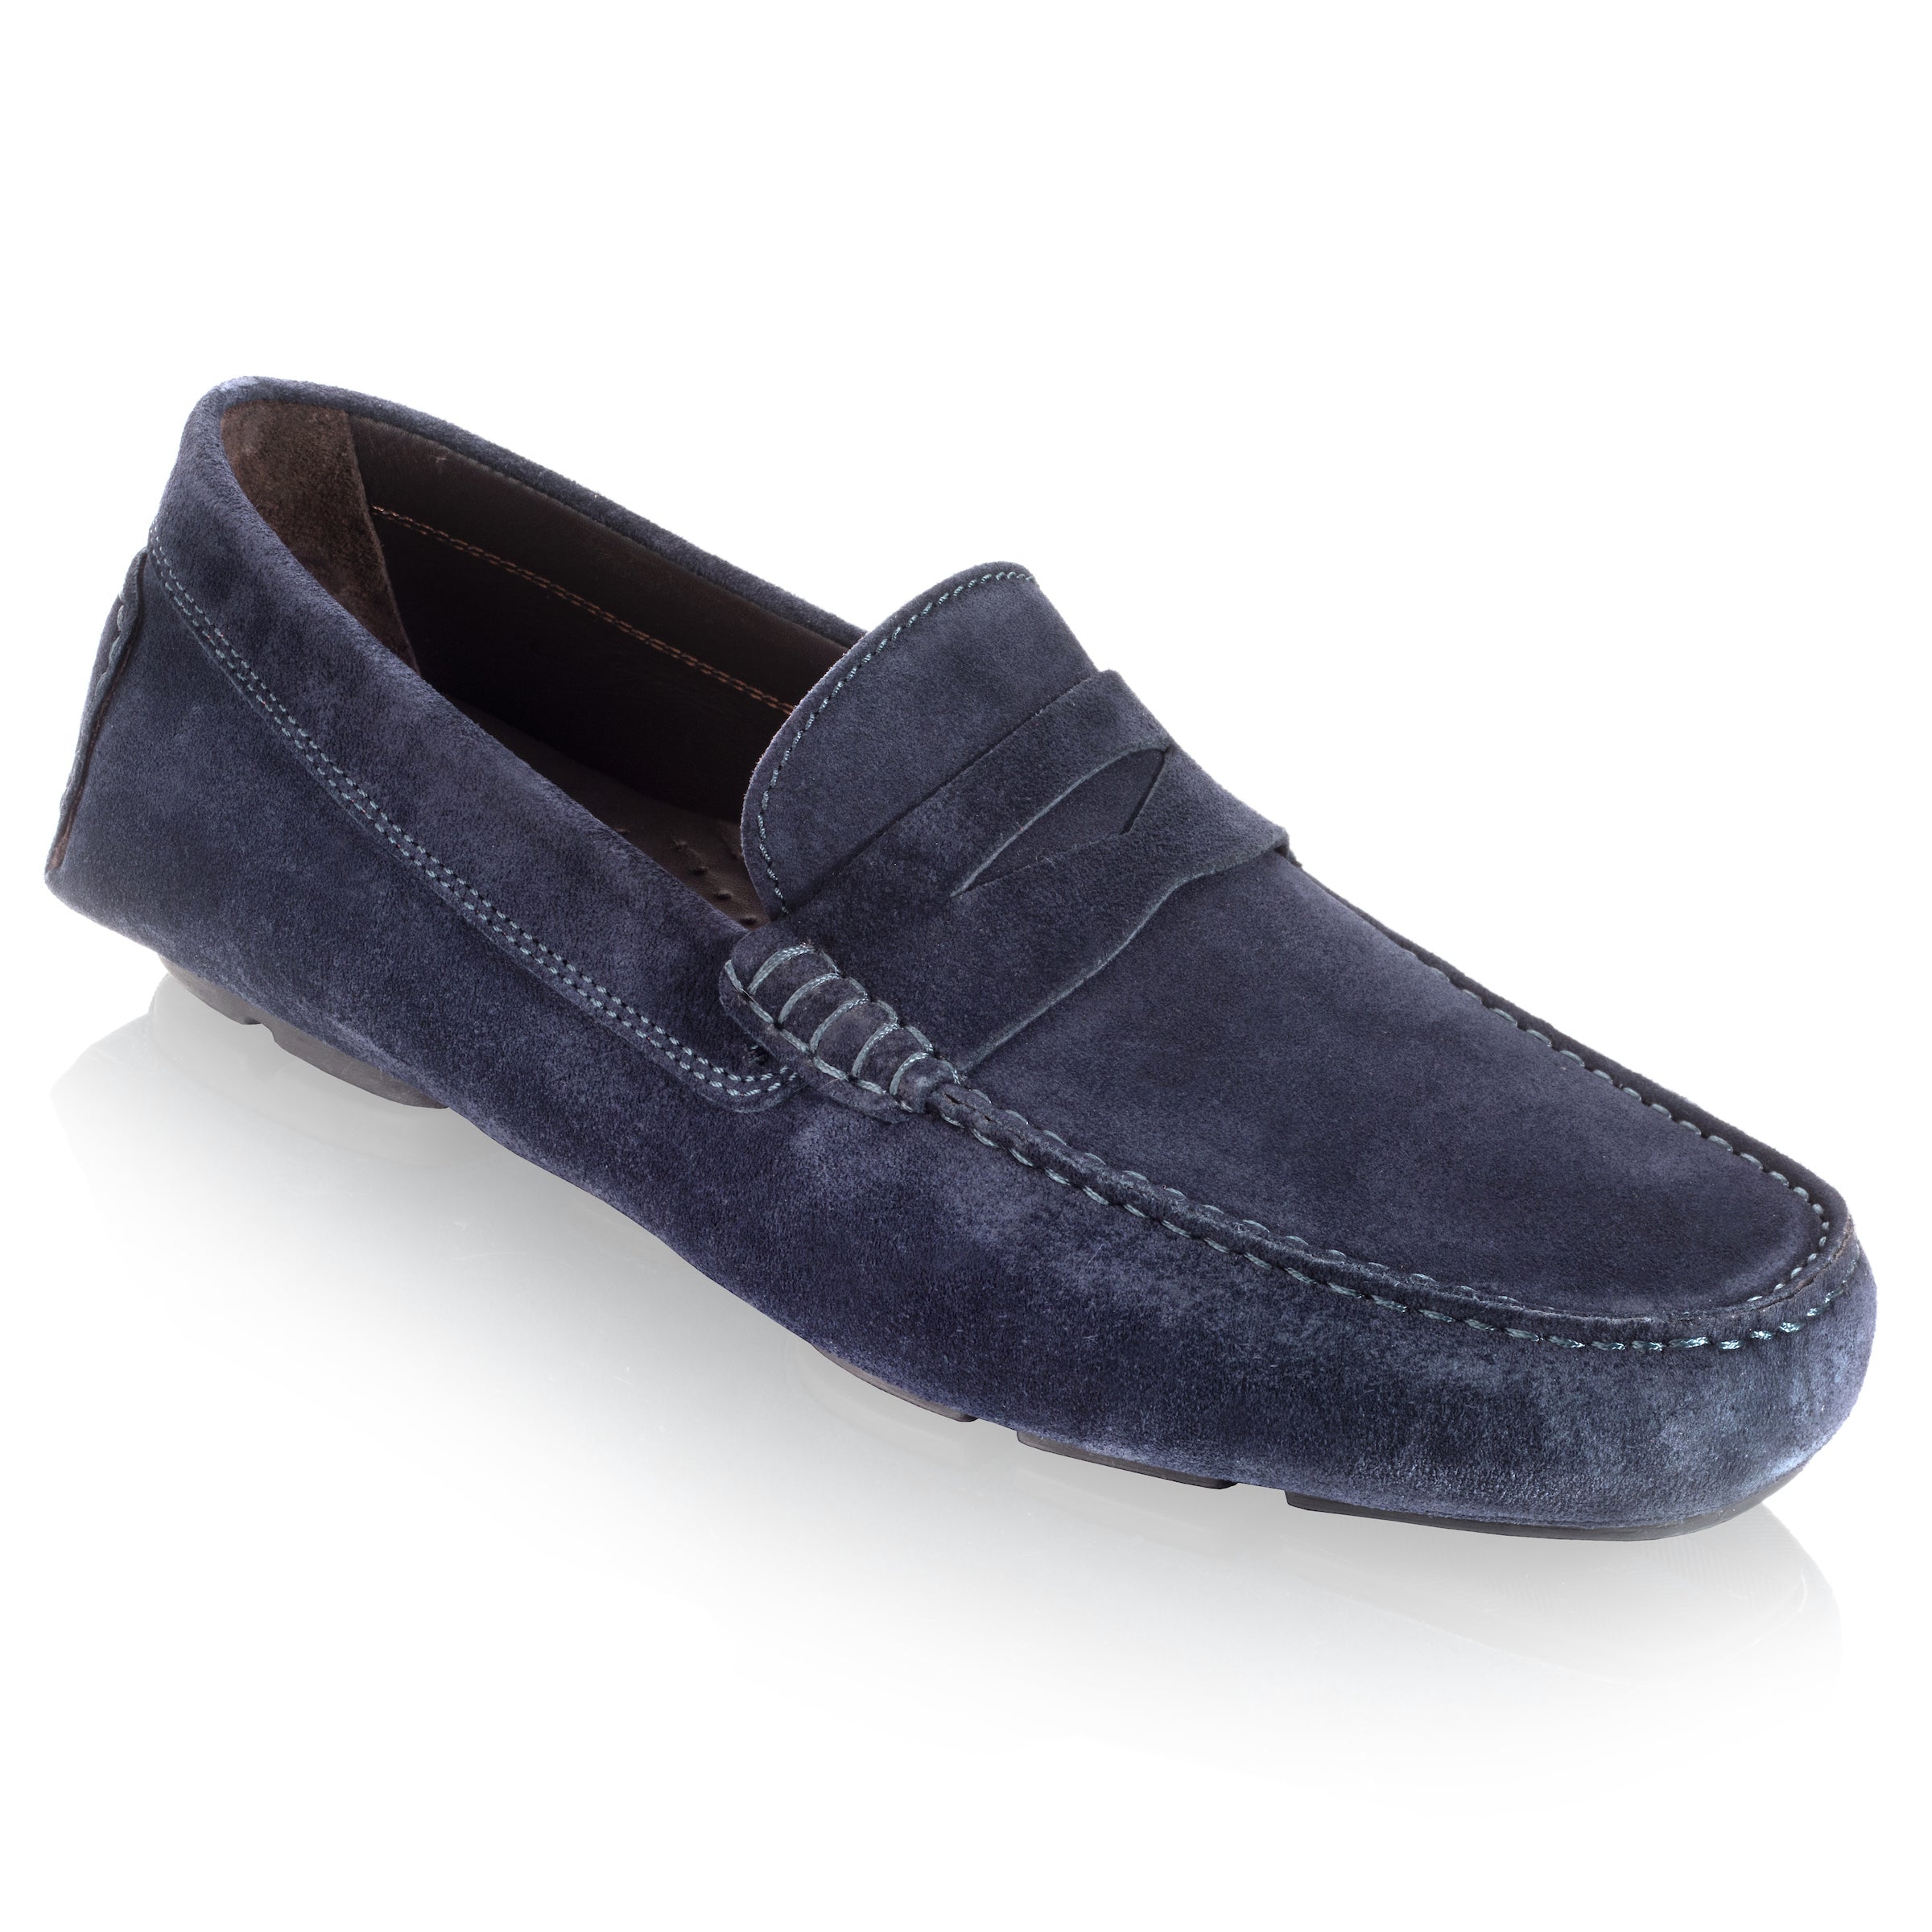 Mitchum Navy Blue Suede Driving Shoe